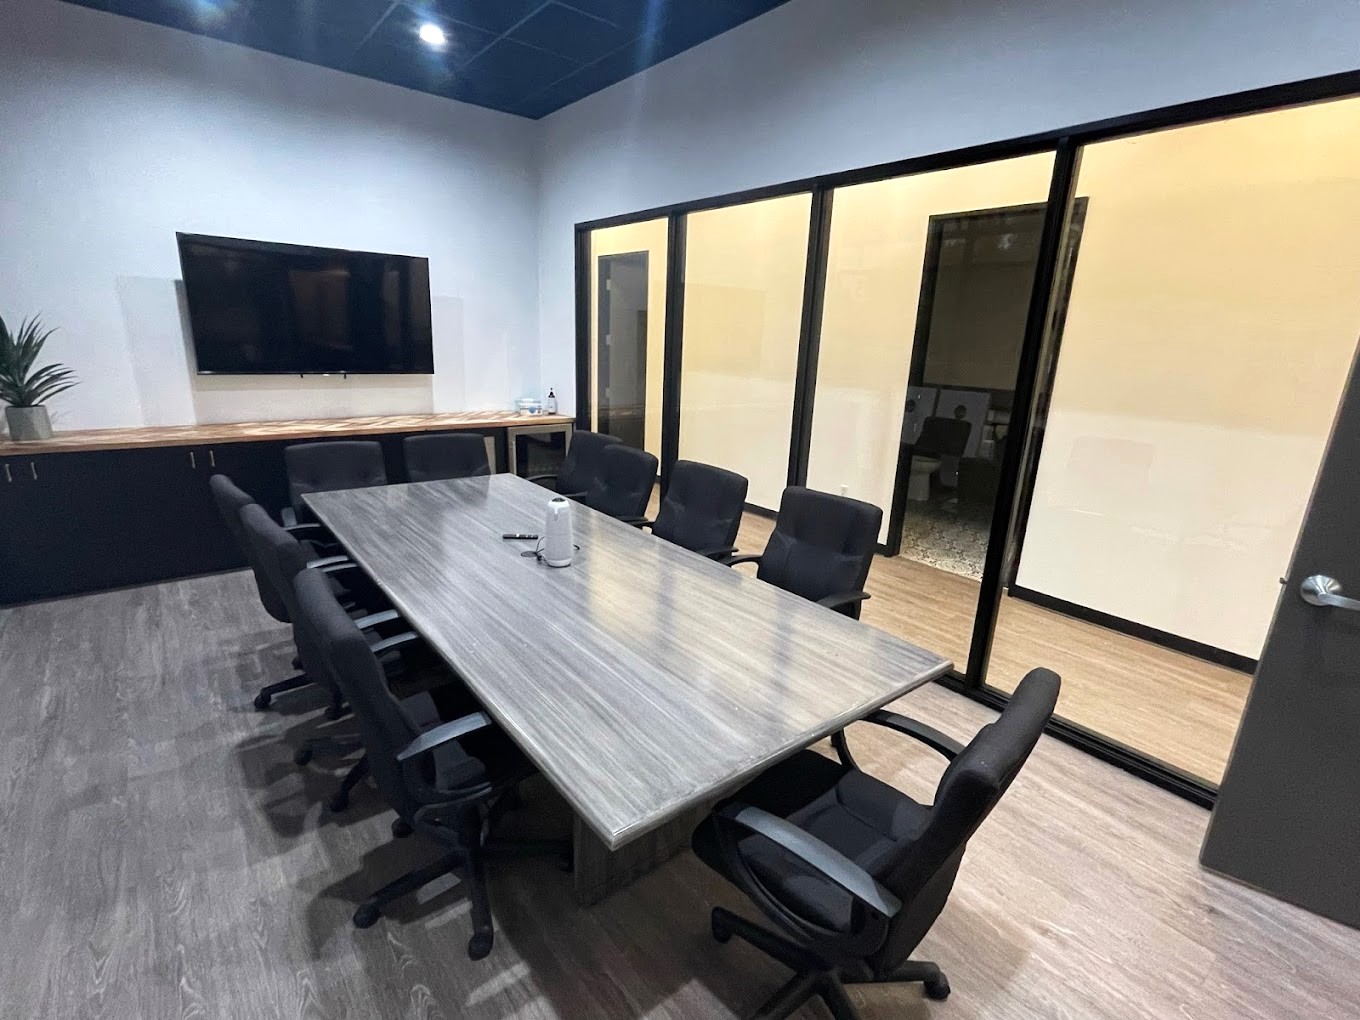 Office conference room